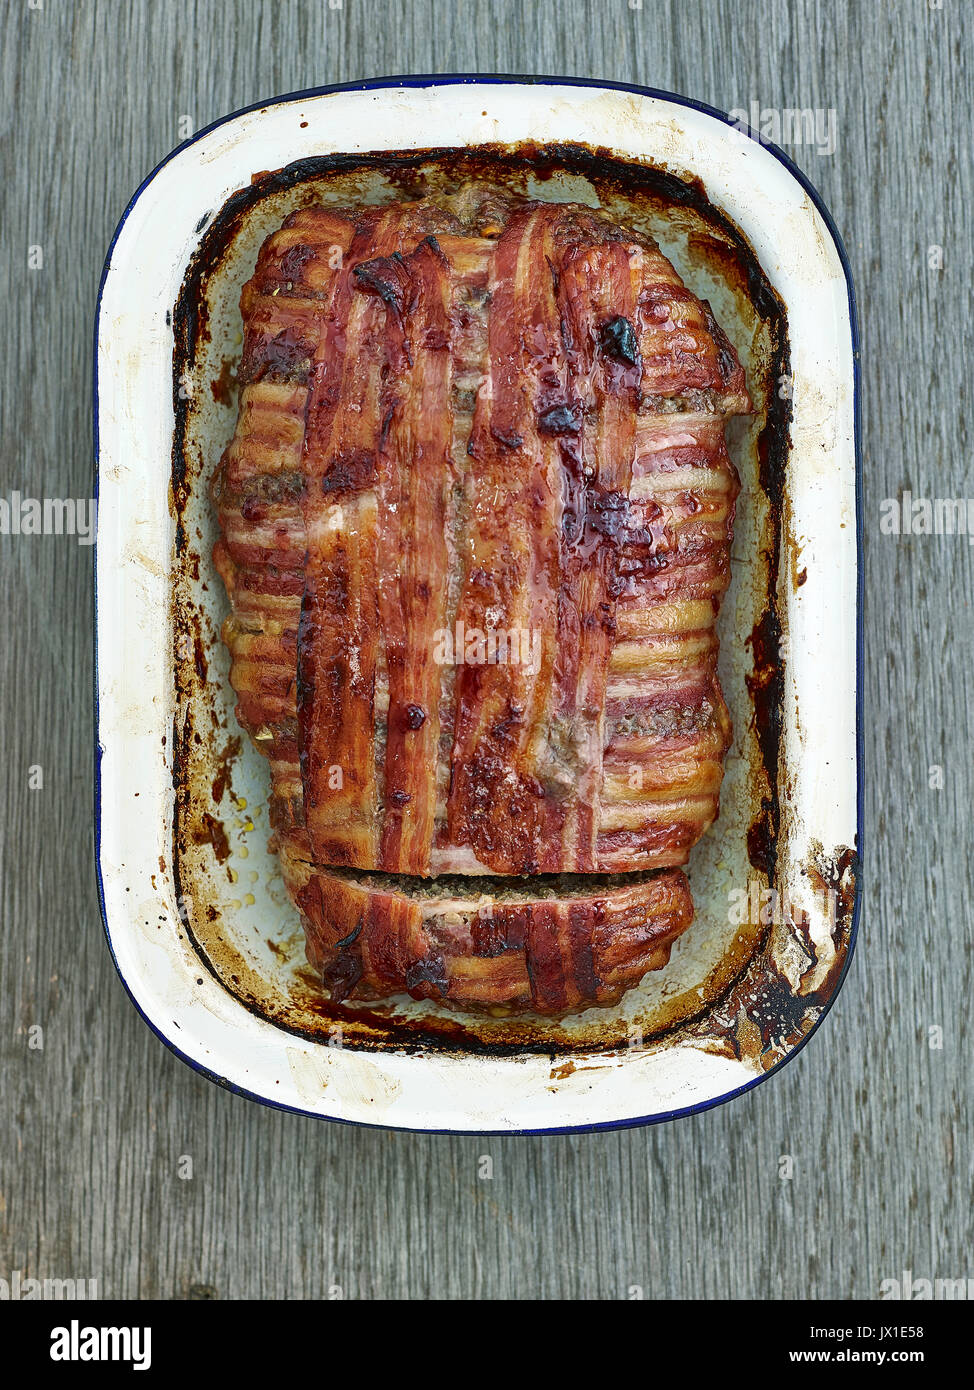 bacon wrapped home made meatloaf Stock Photo